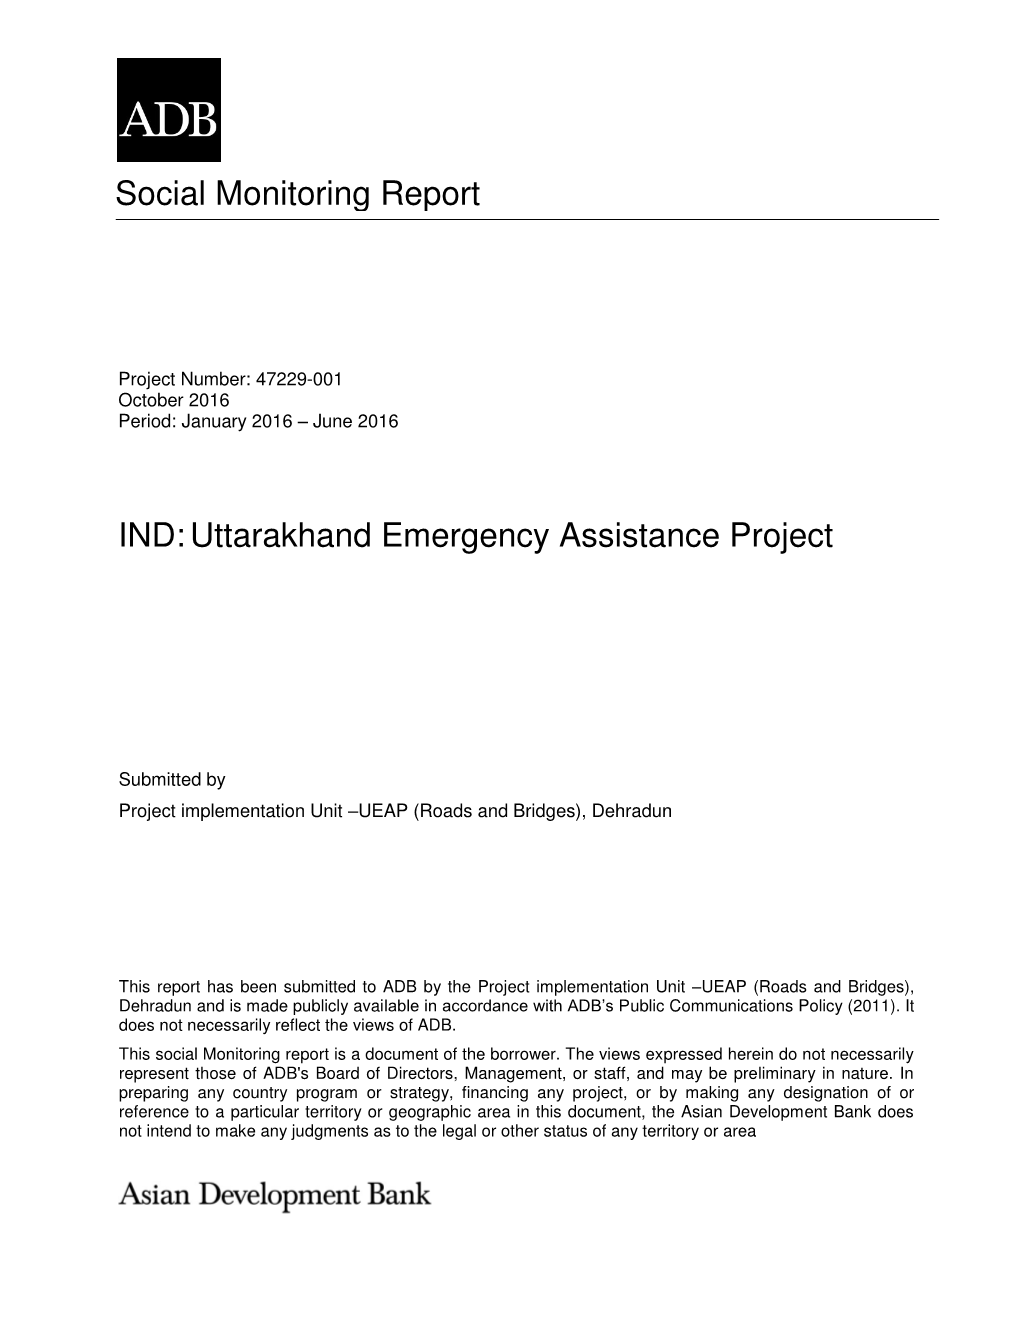 Social Monitoring Report IND:Uttarakhand Emergency Assistance Project